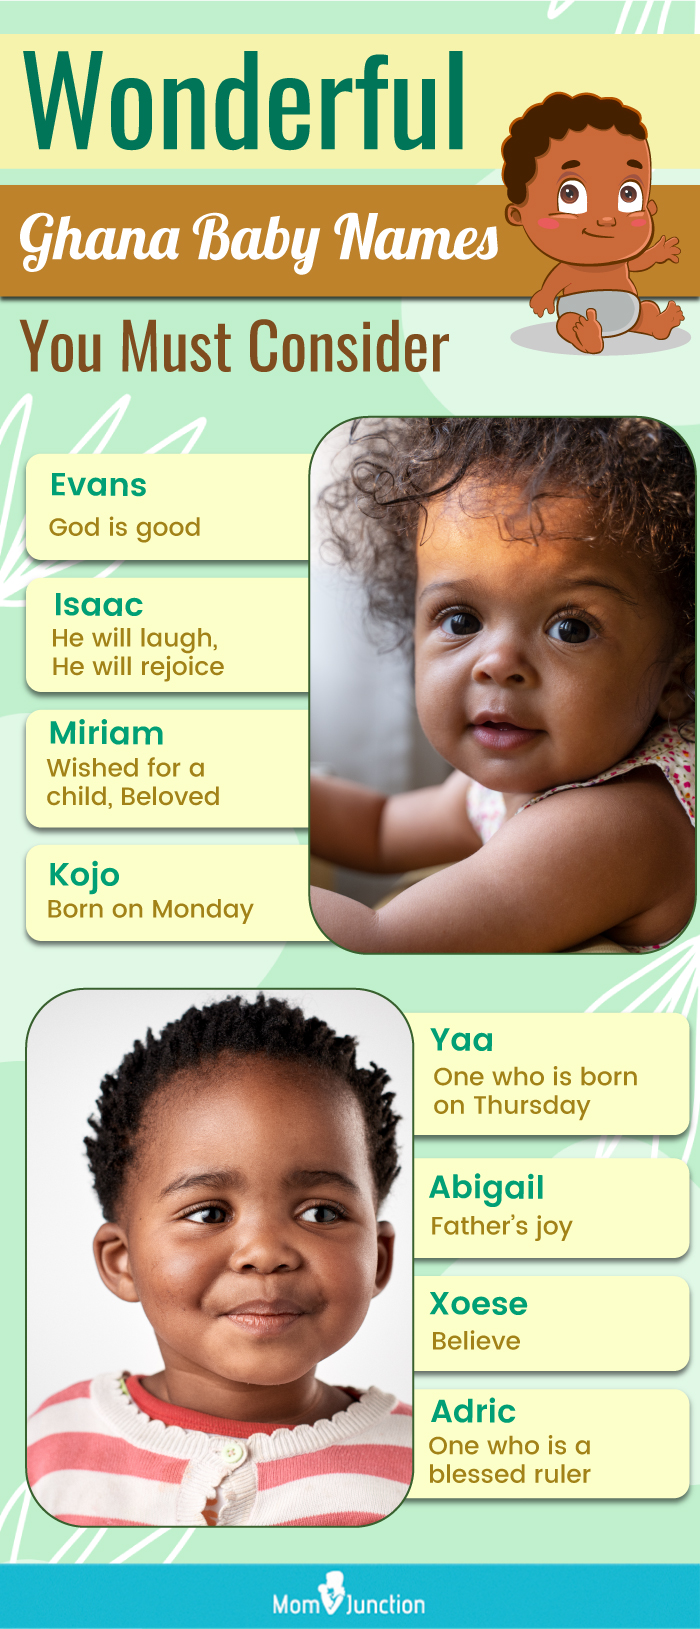 wonderful ghana baby names you must consider (infographic)